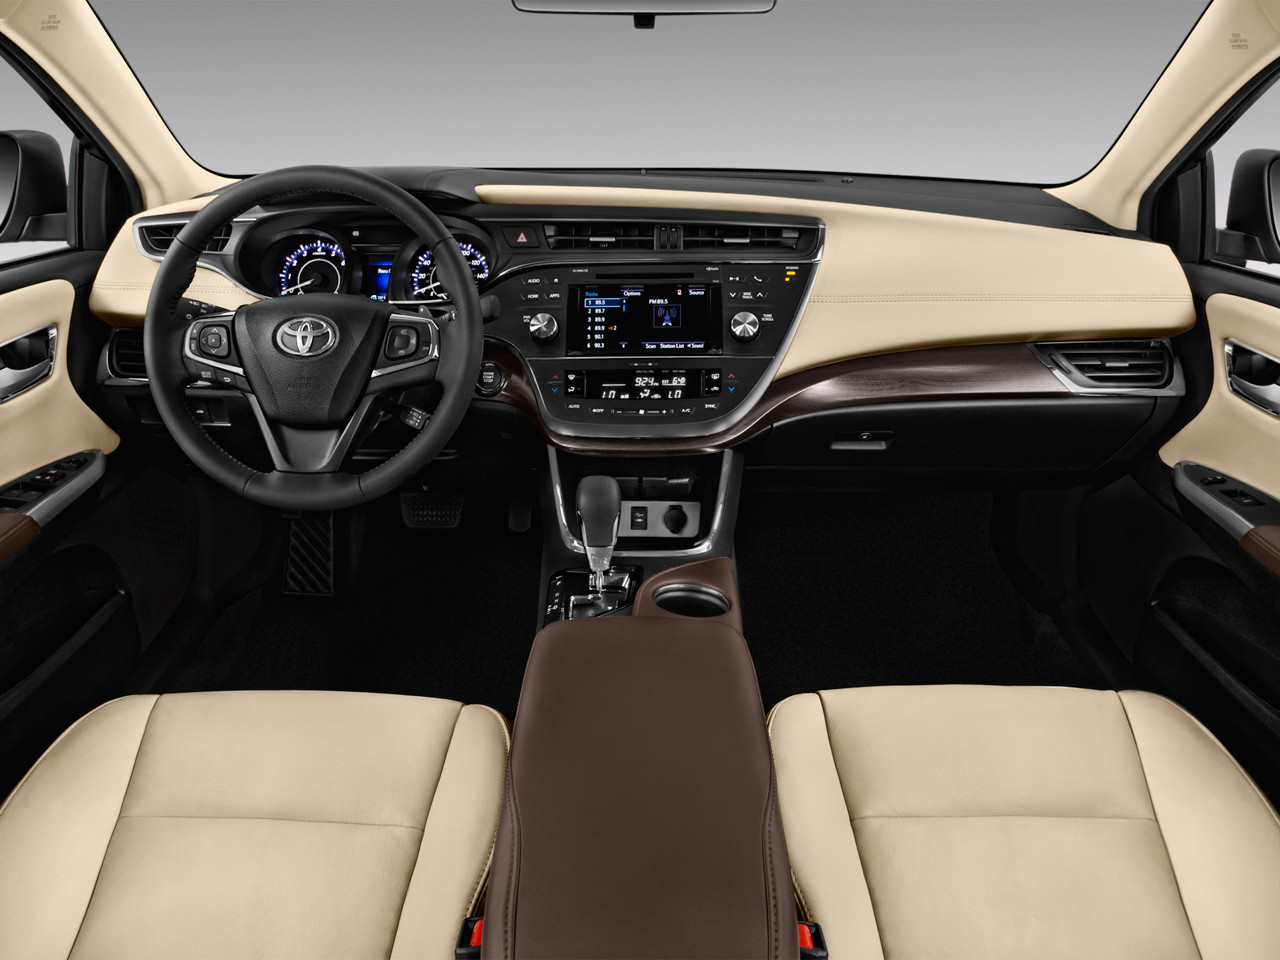 2018 Toyota Avalon Limited Interior | Future Cars Release Date